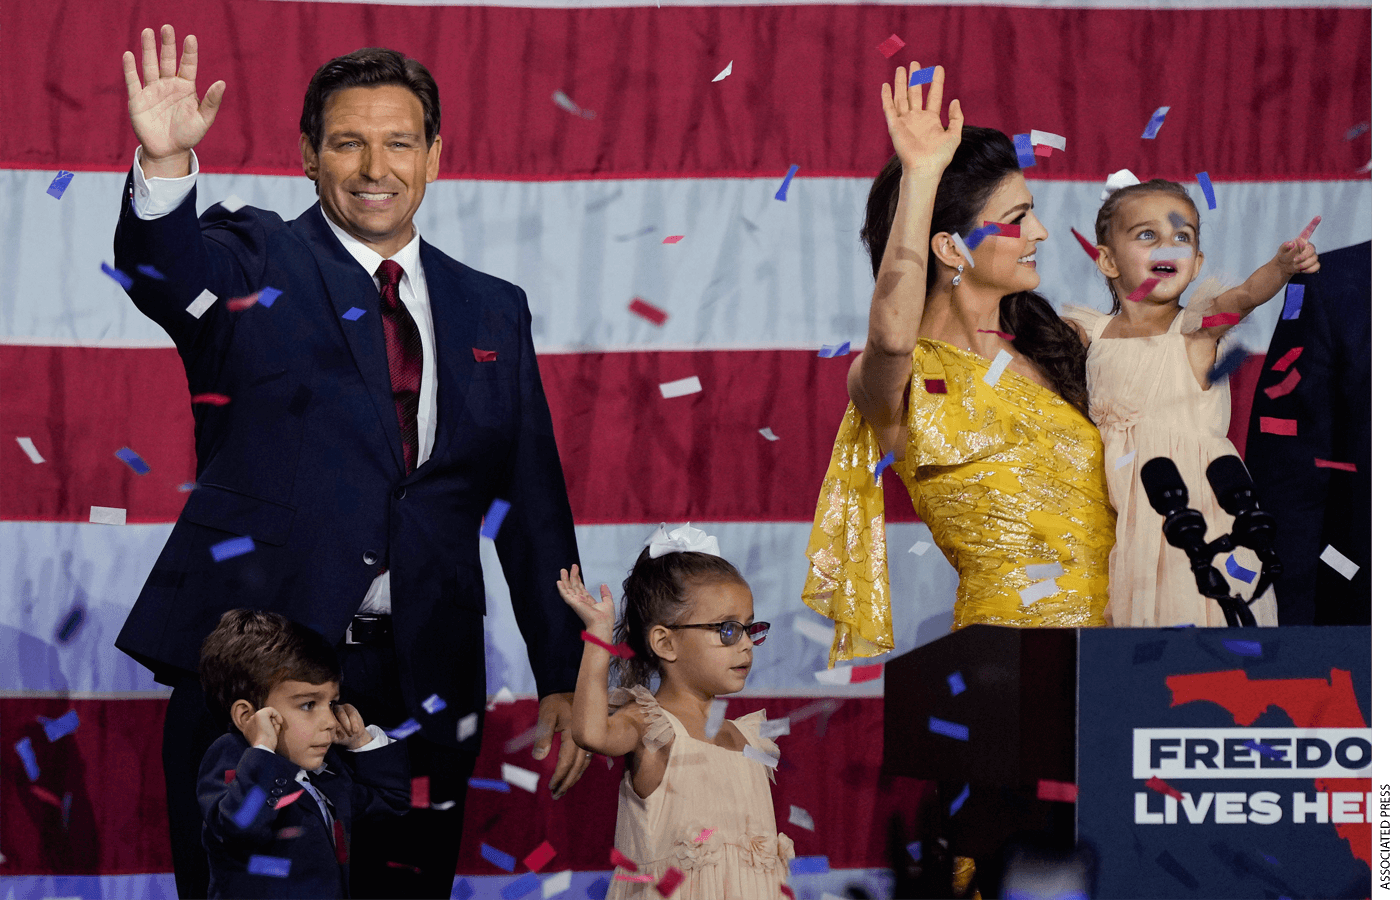 Incumbent Florida Republican Gov. Ron DeSantis, his wife Casey and their children on stage after speaking to supporters at an election night party after winning his race for reelection in Tampa, Fla., Tuesday, Nov. 8, 2022.